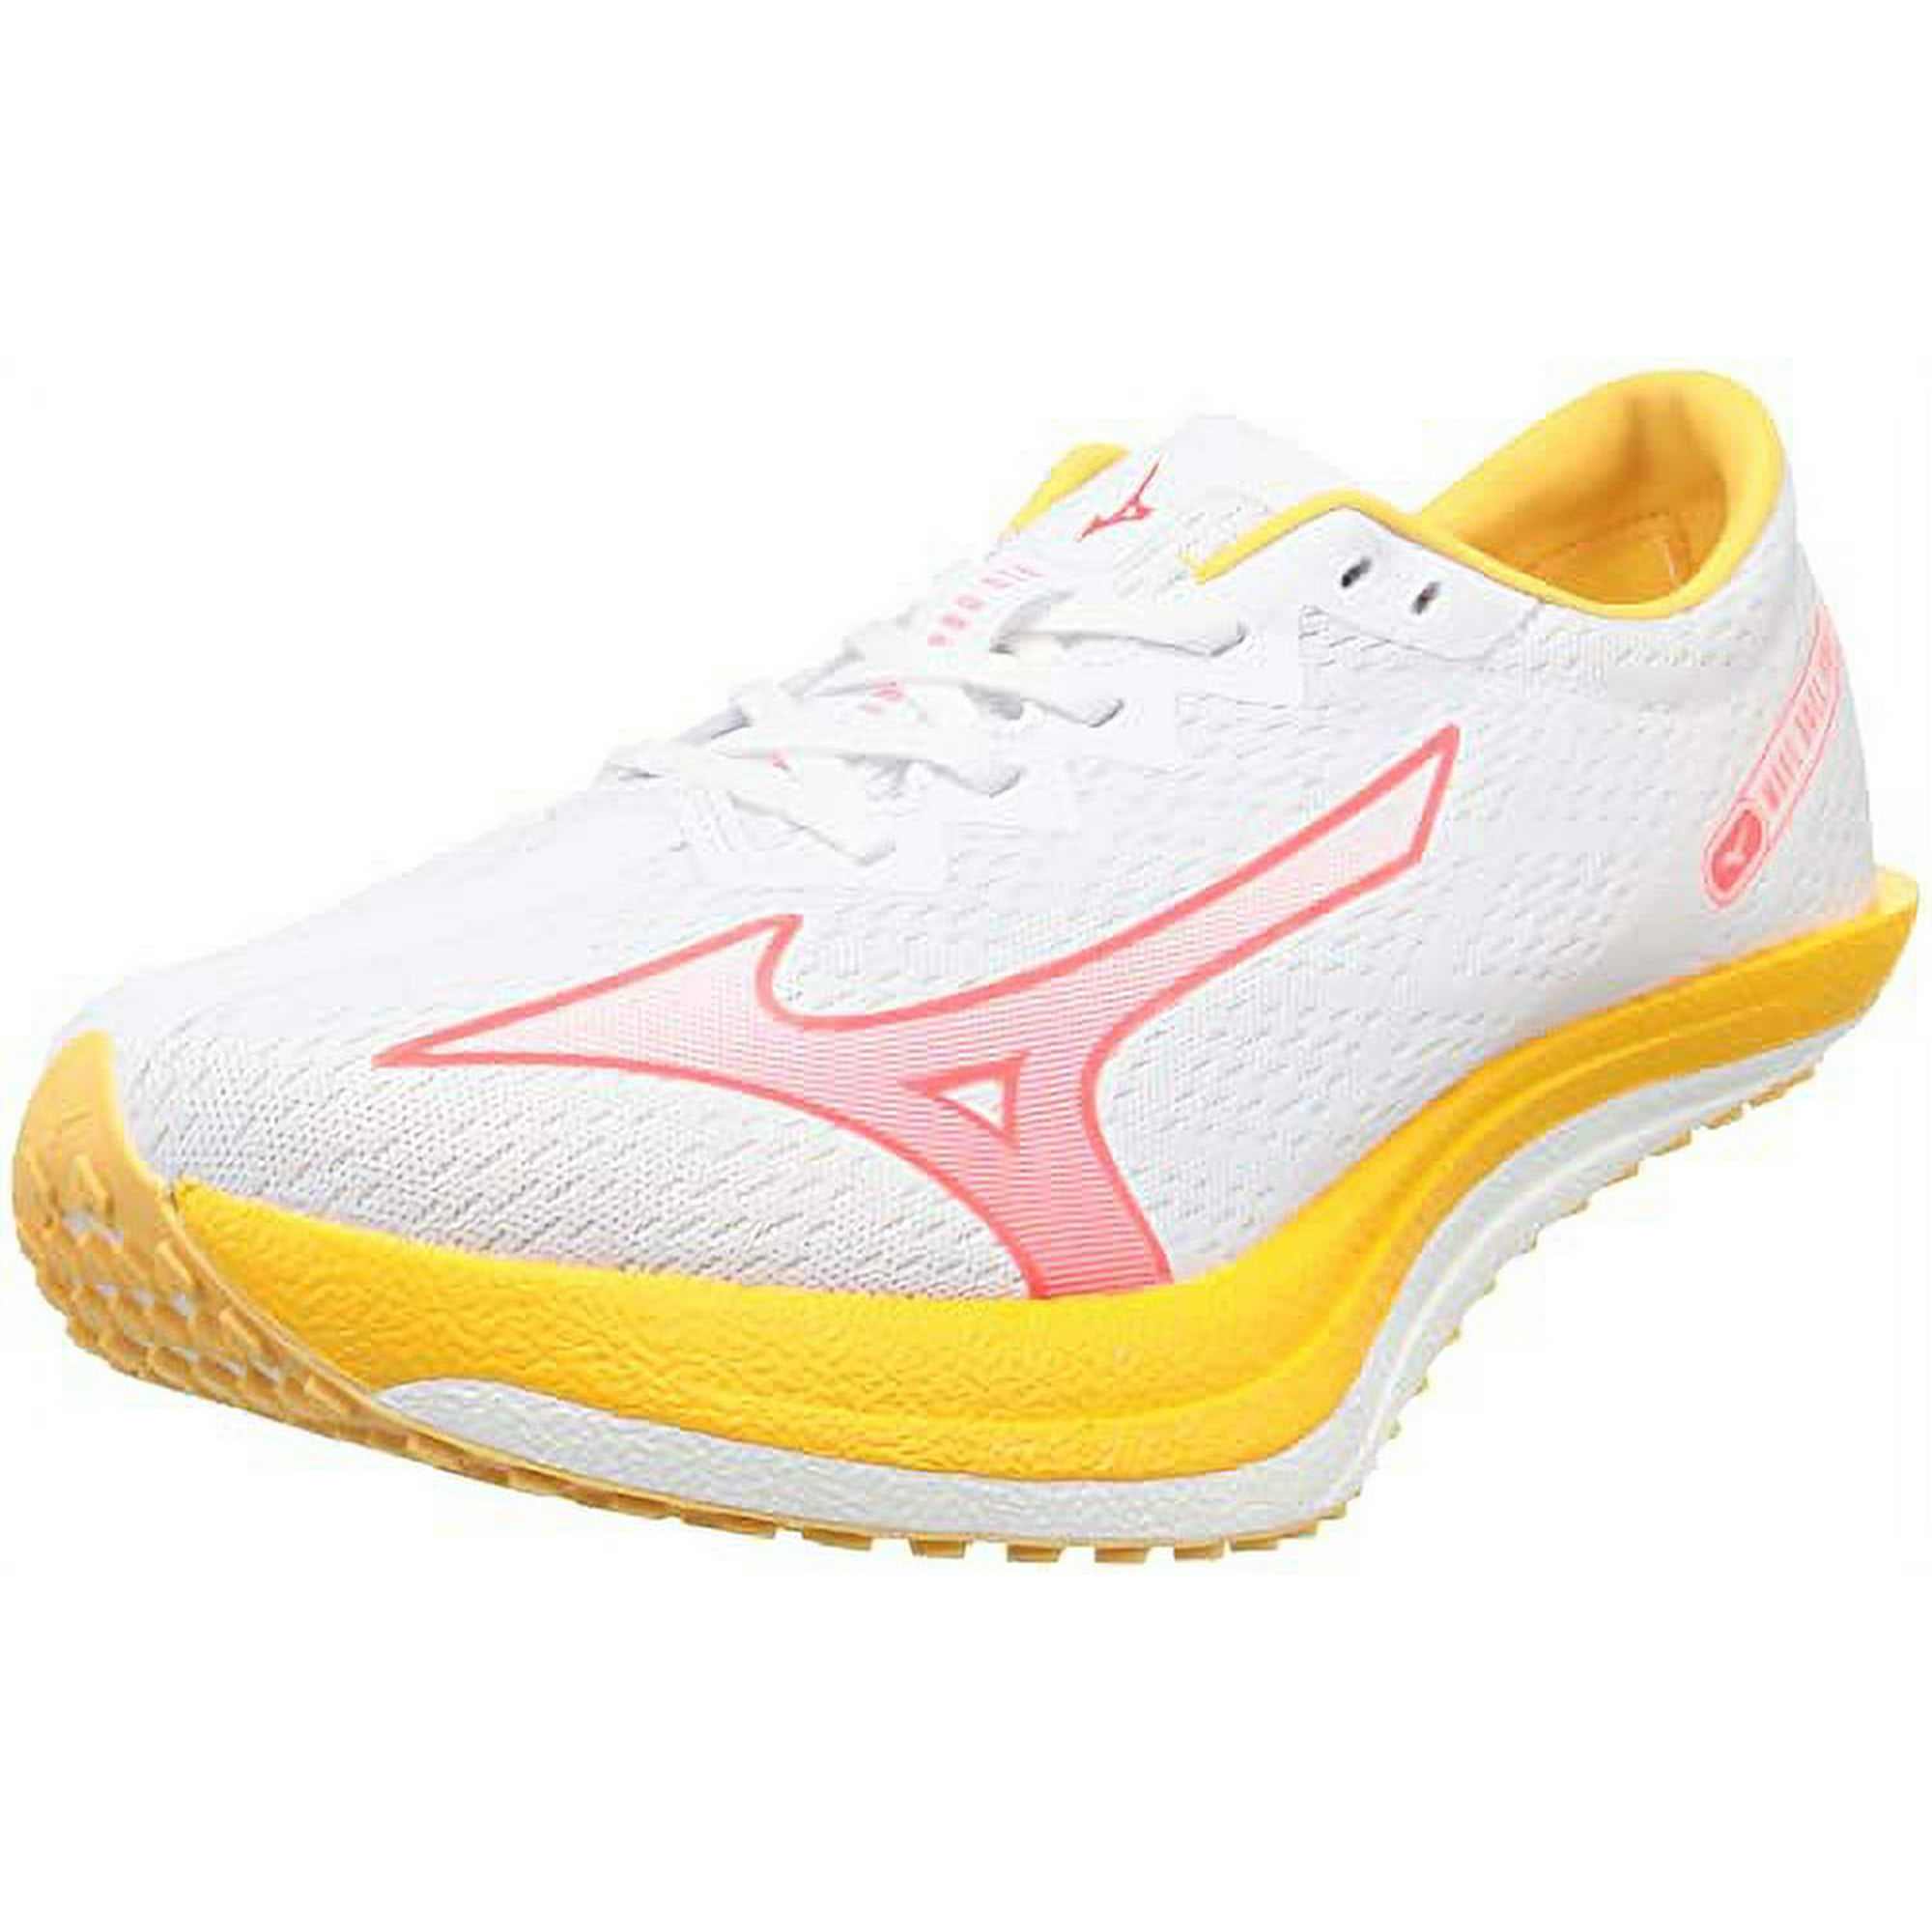 Mizuno] Track and Field Shoes Wave Duel PRO QTR White x Pink x